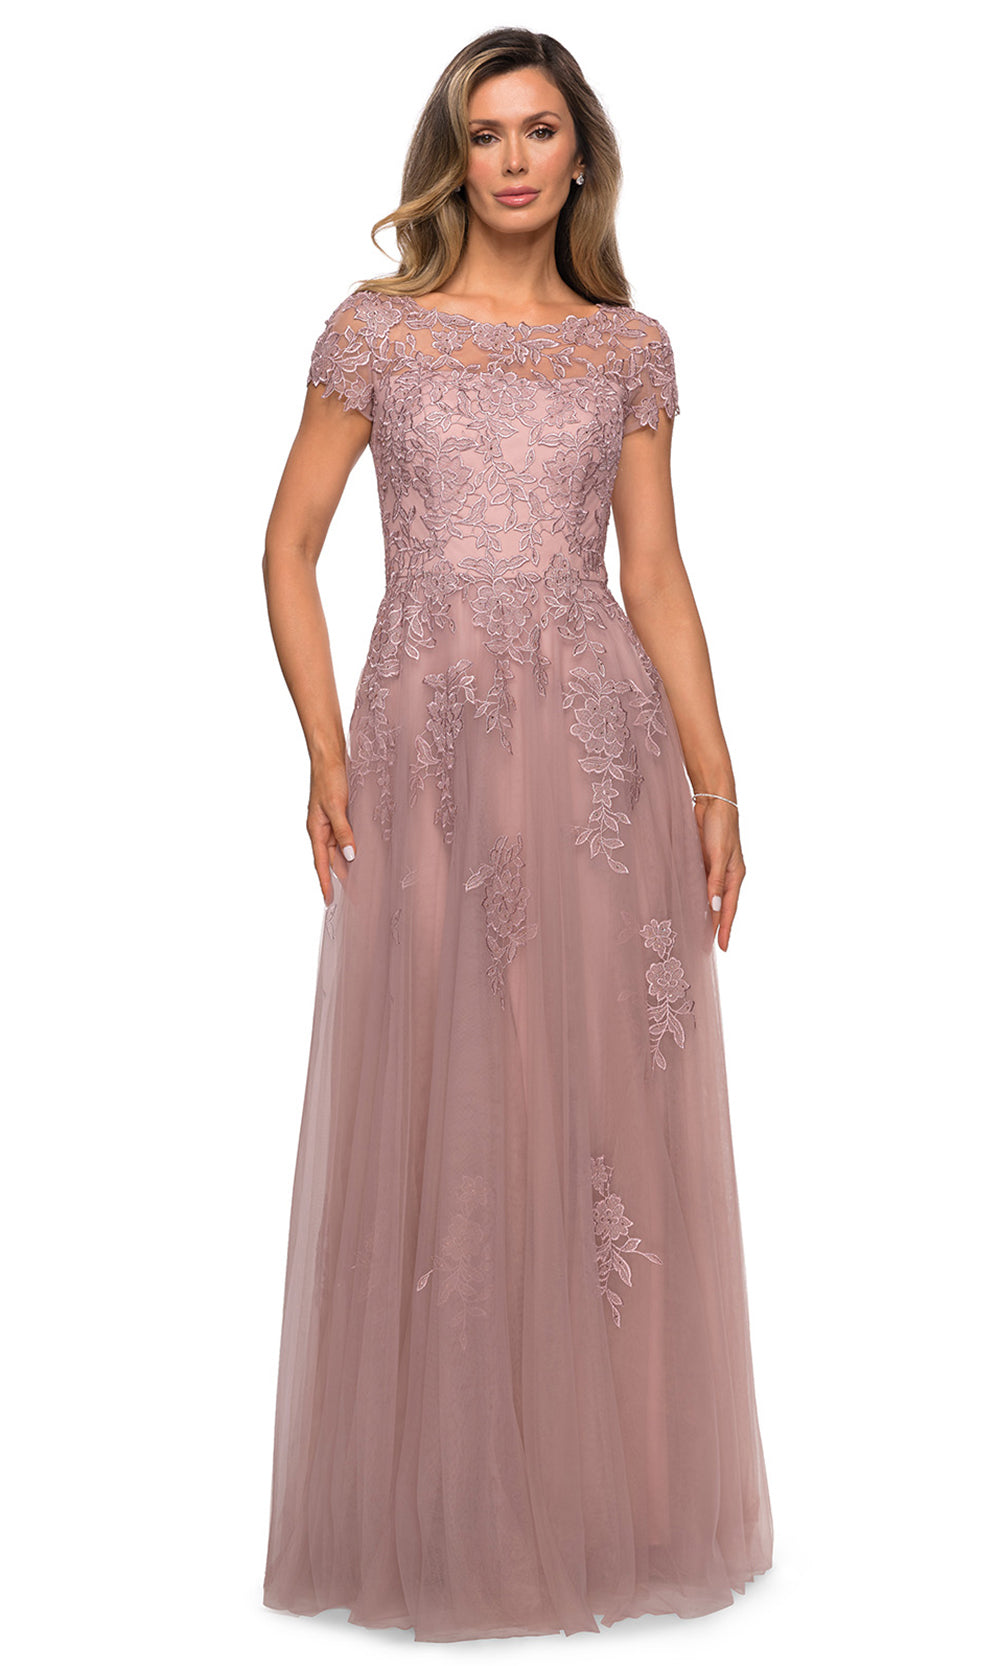 La Femme - 27920 Lace And Tulle A-Line Dress In Pink